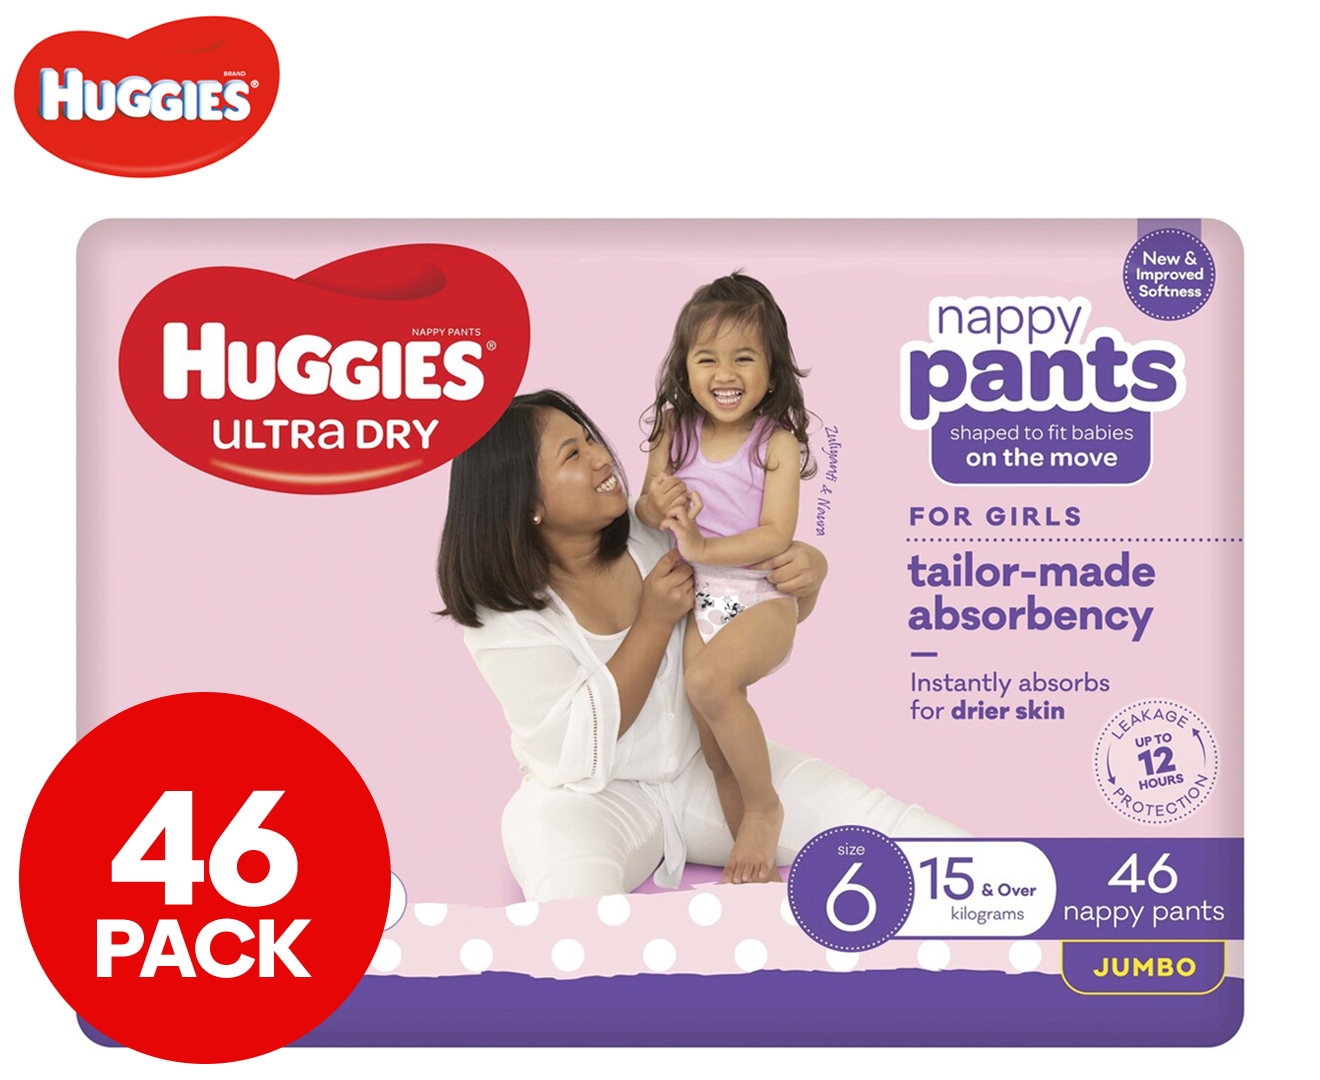 Buy Huggies Ultra Dry Nappy Pants Girls Size 5 (12-17kg) online at